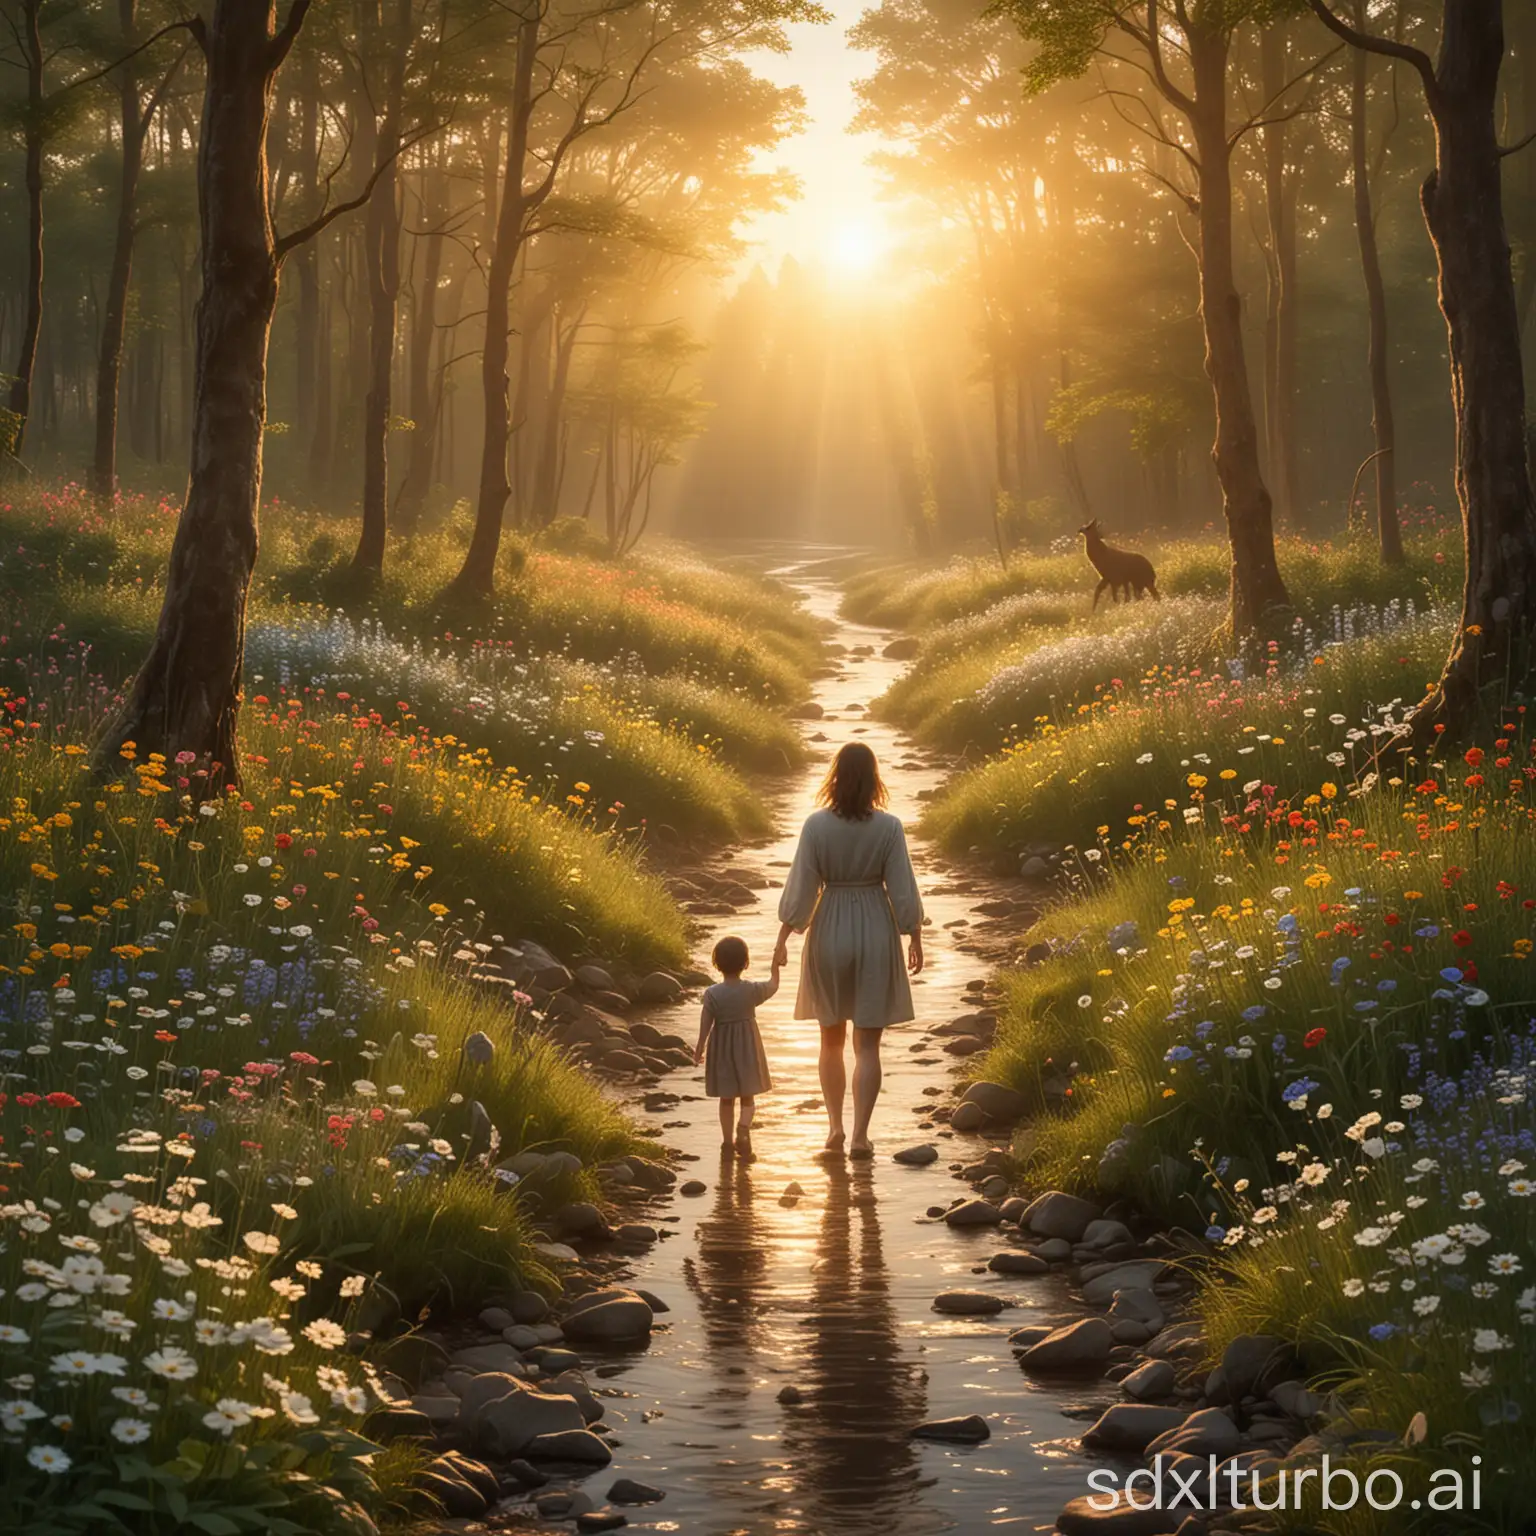 A mother is walking toward the place where the sun rises with a child in one hand, viewed from behind, with flowers, forests, and streams along the way. There might also be animals.